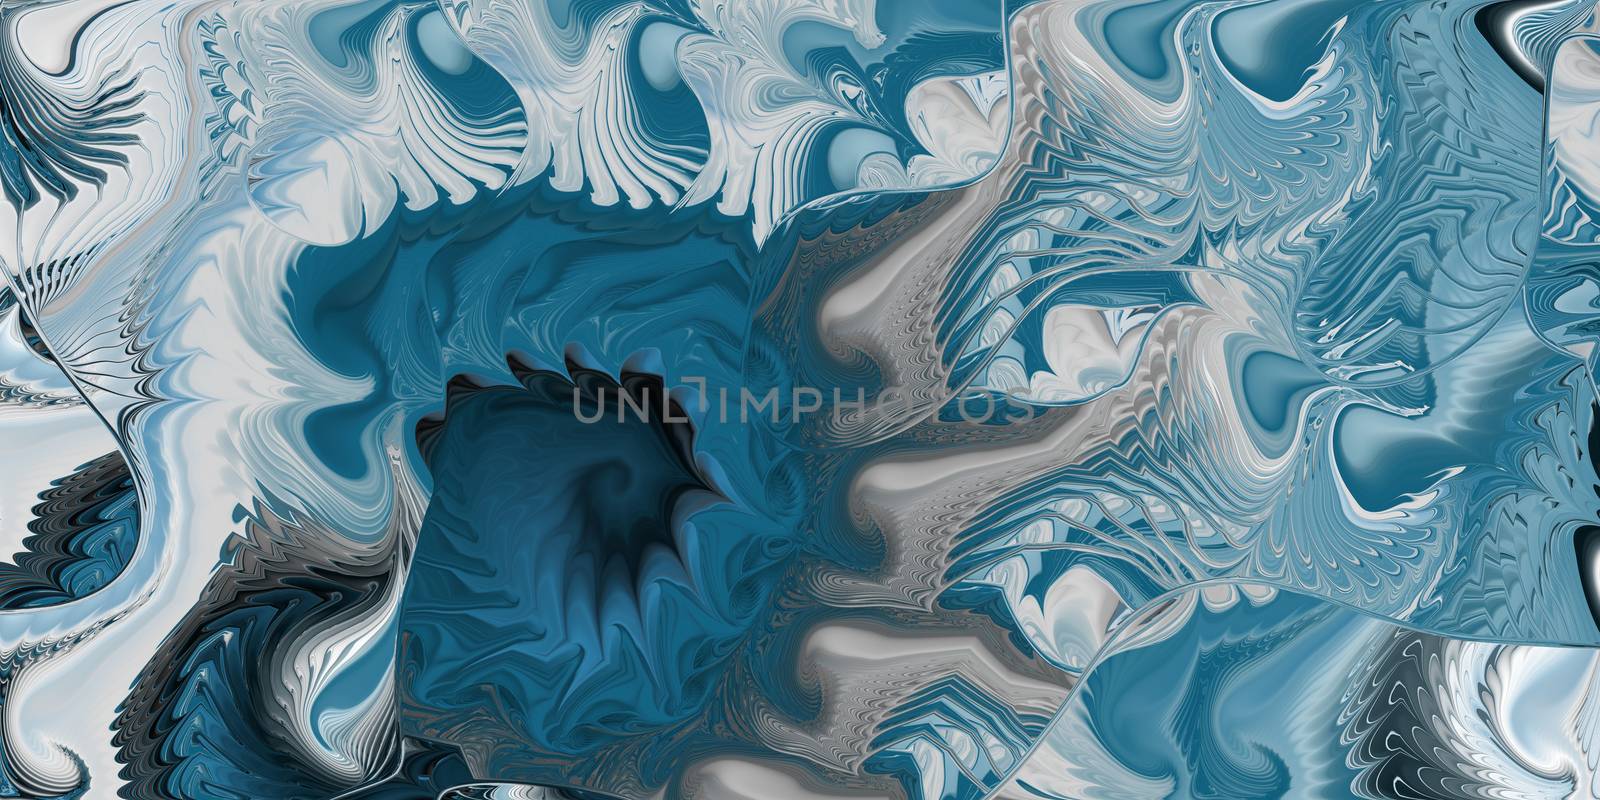 Dark Blue Sea Swirls Background. Abstract Ocean Marbling Curves Texture. Nautical Spiral Shell Infinity Backdrop. by sanches812